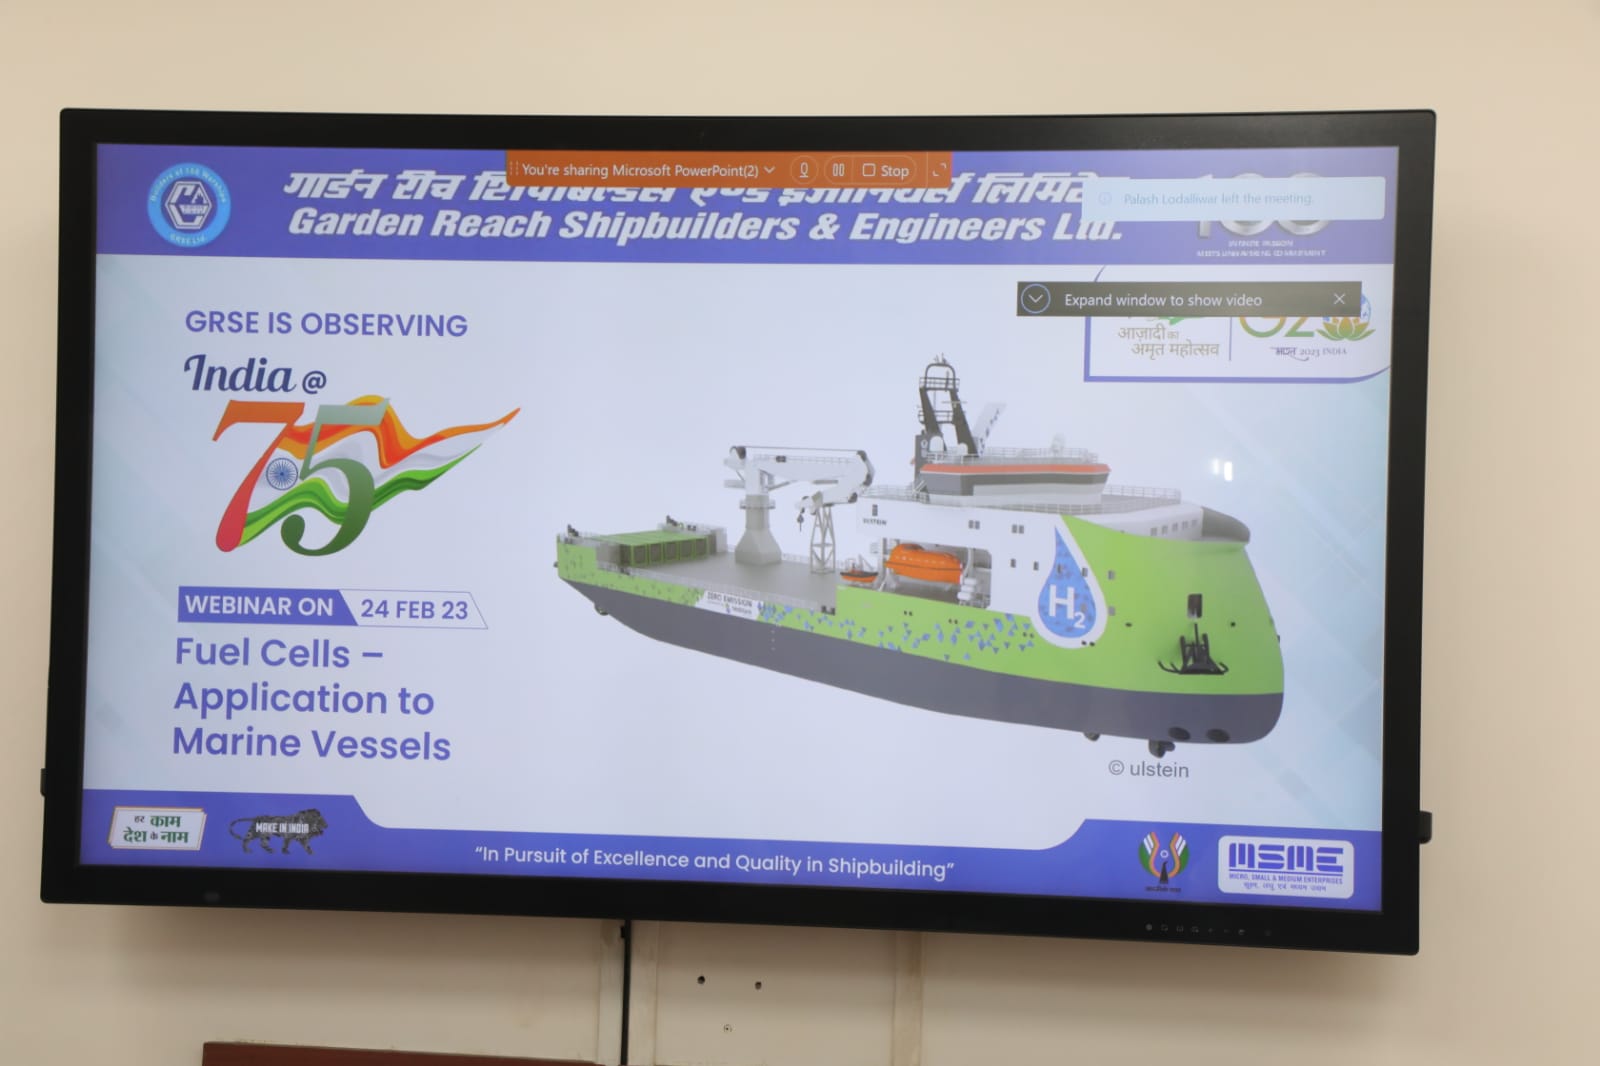 INDIA@75 - PHASE IX Webinar on 'Fuel Cells - Application to Marine Vessels' on 24 Feb 23